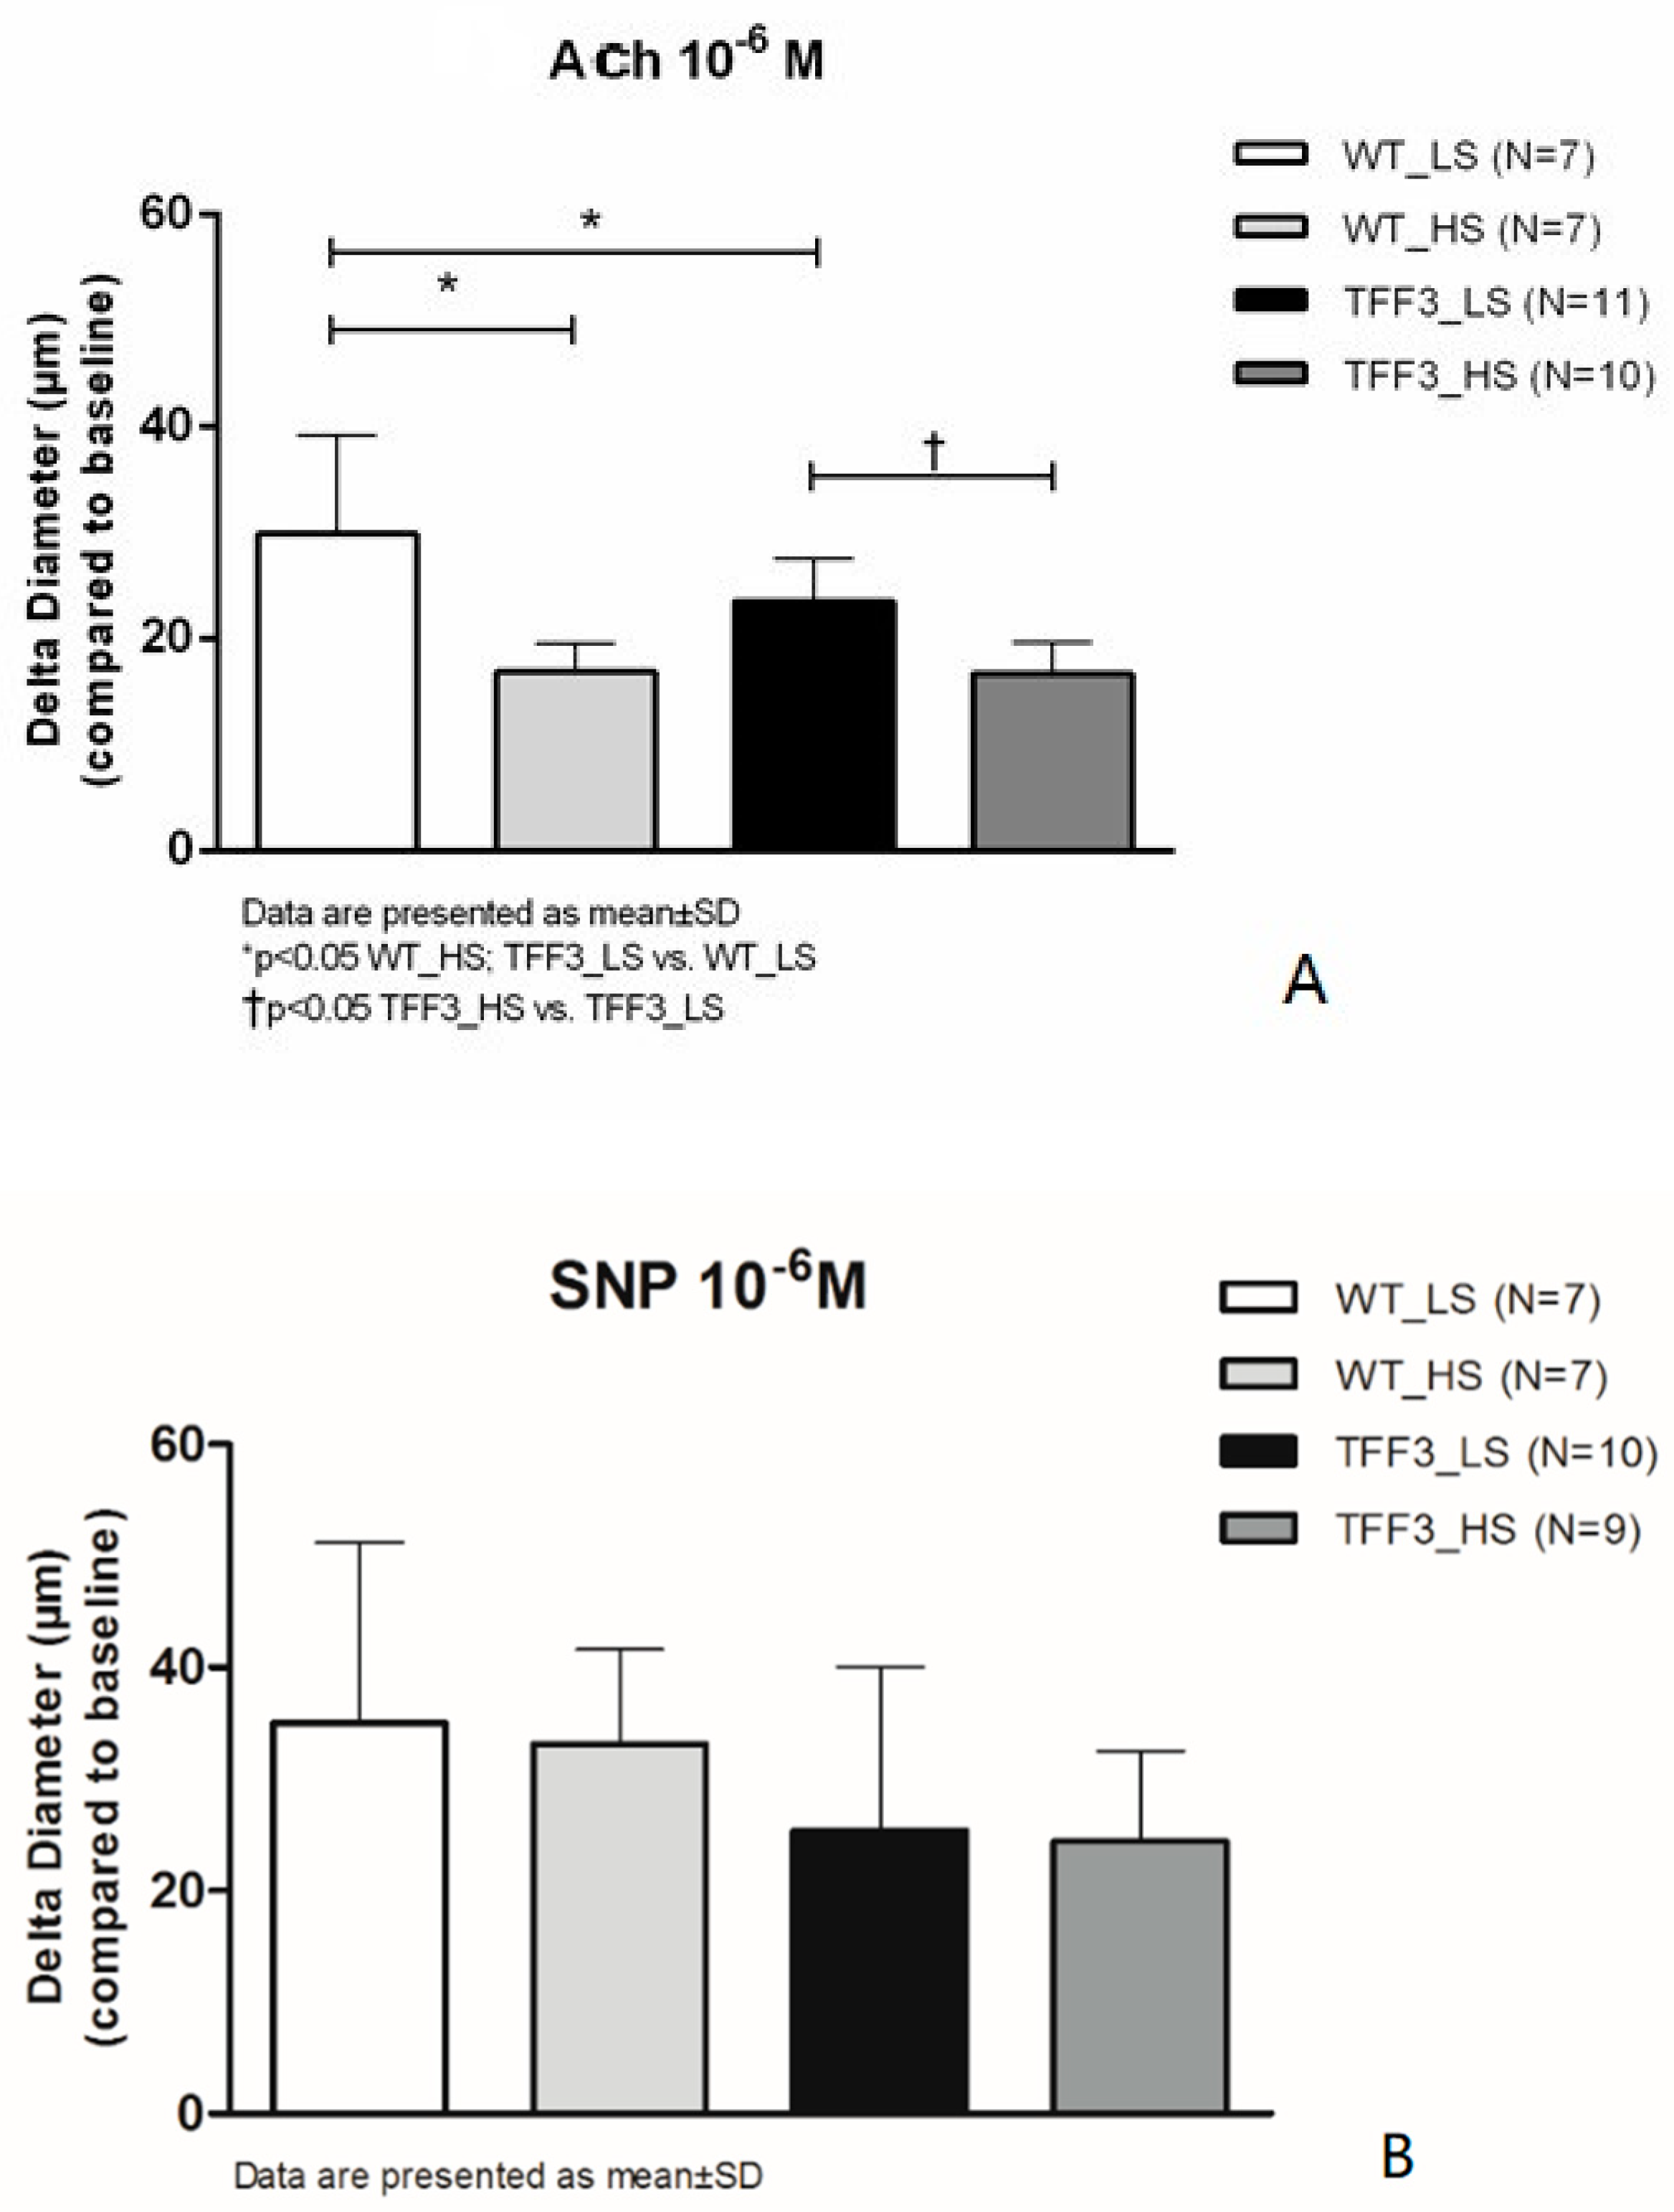 Ijms Free Full Text Impact Of High Salt Diet On Cerebral Vascular Function And Stroke In Tff3 C57bl 6n Knockout And Wt C57bl 6n Control Mice Html